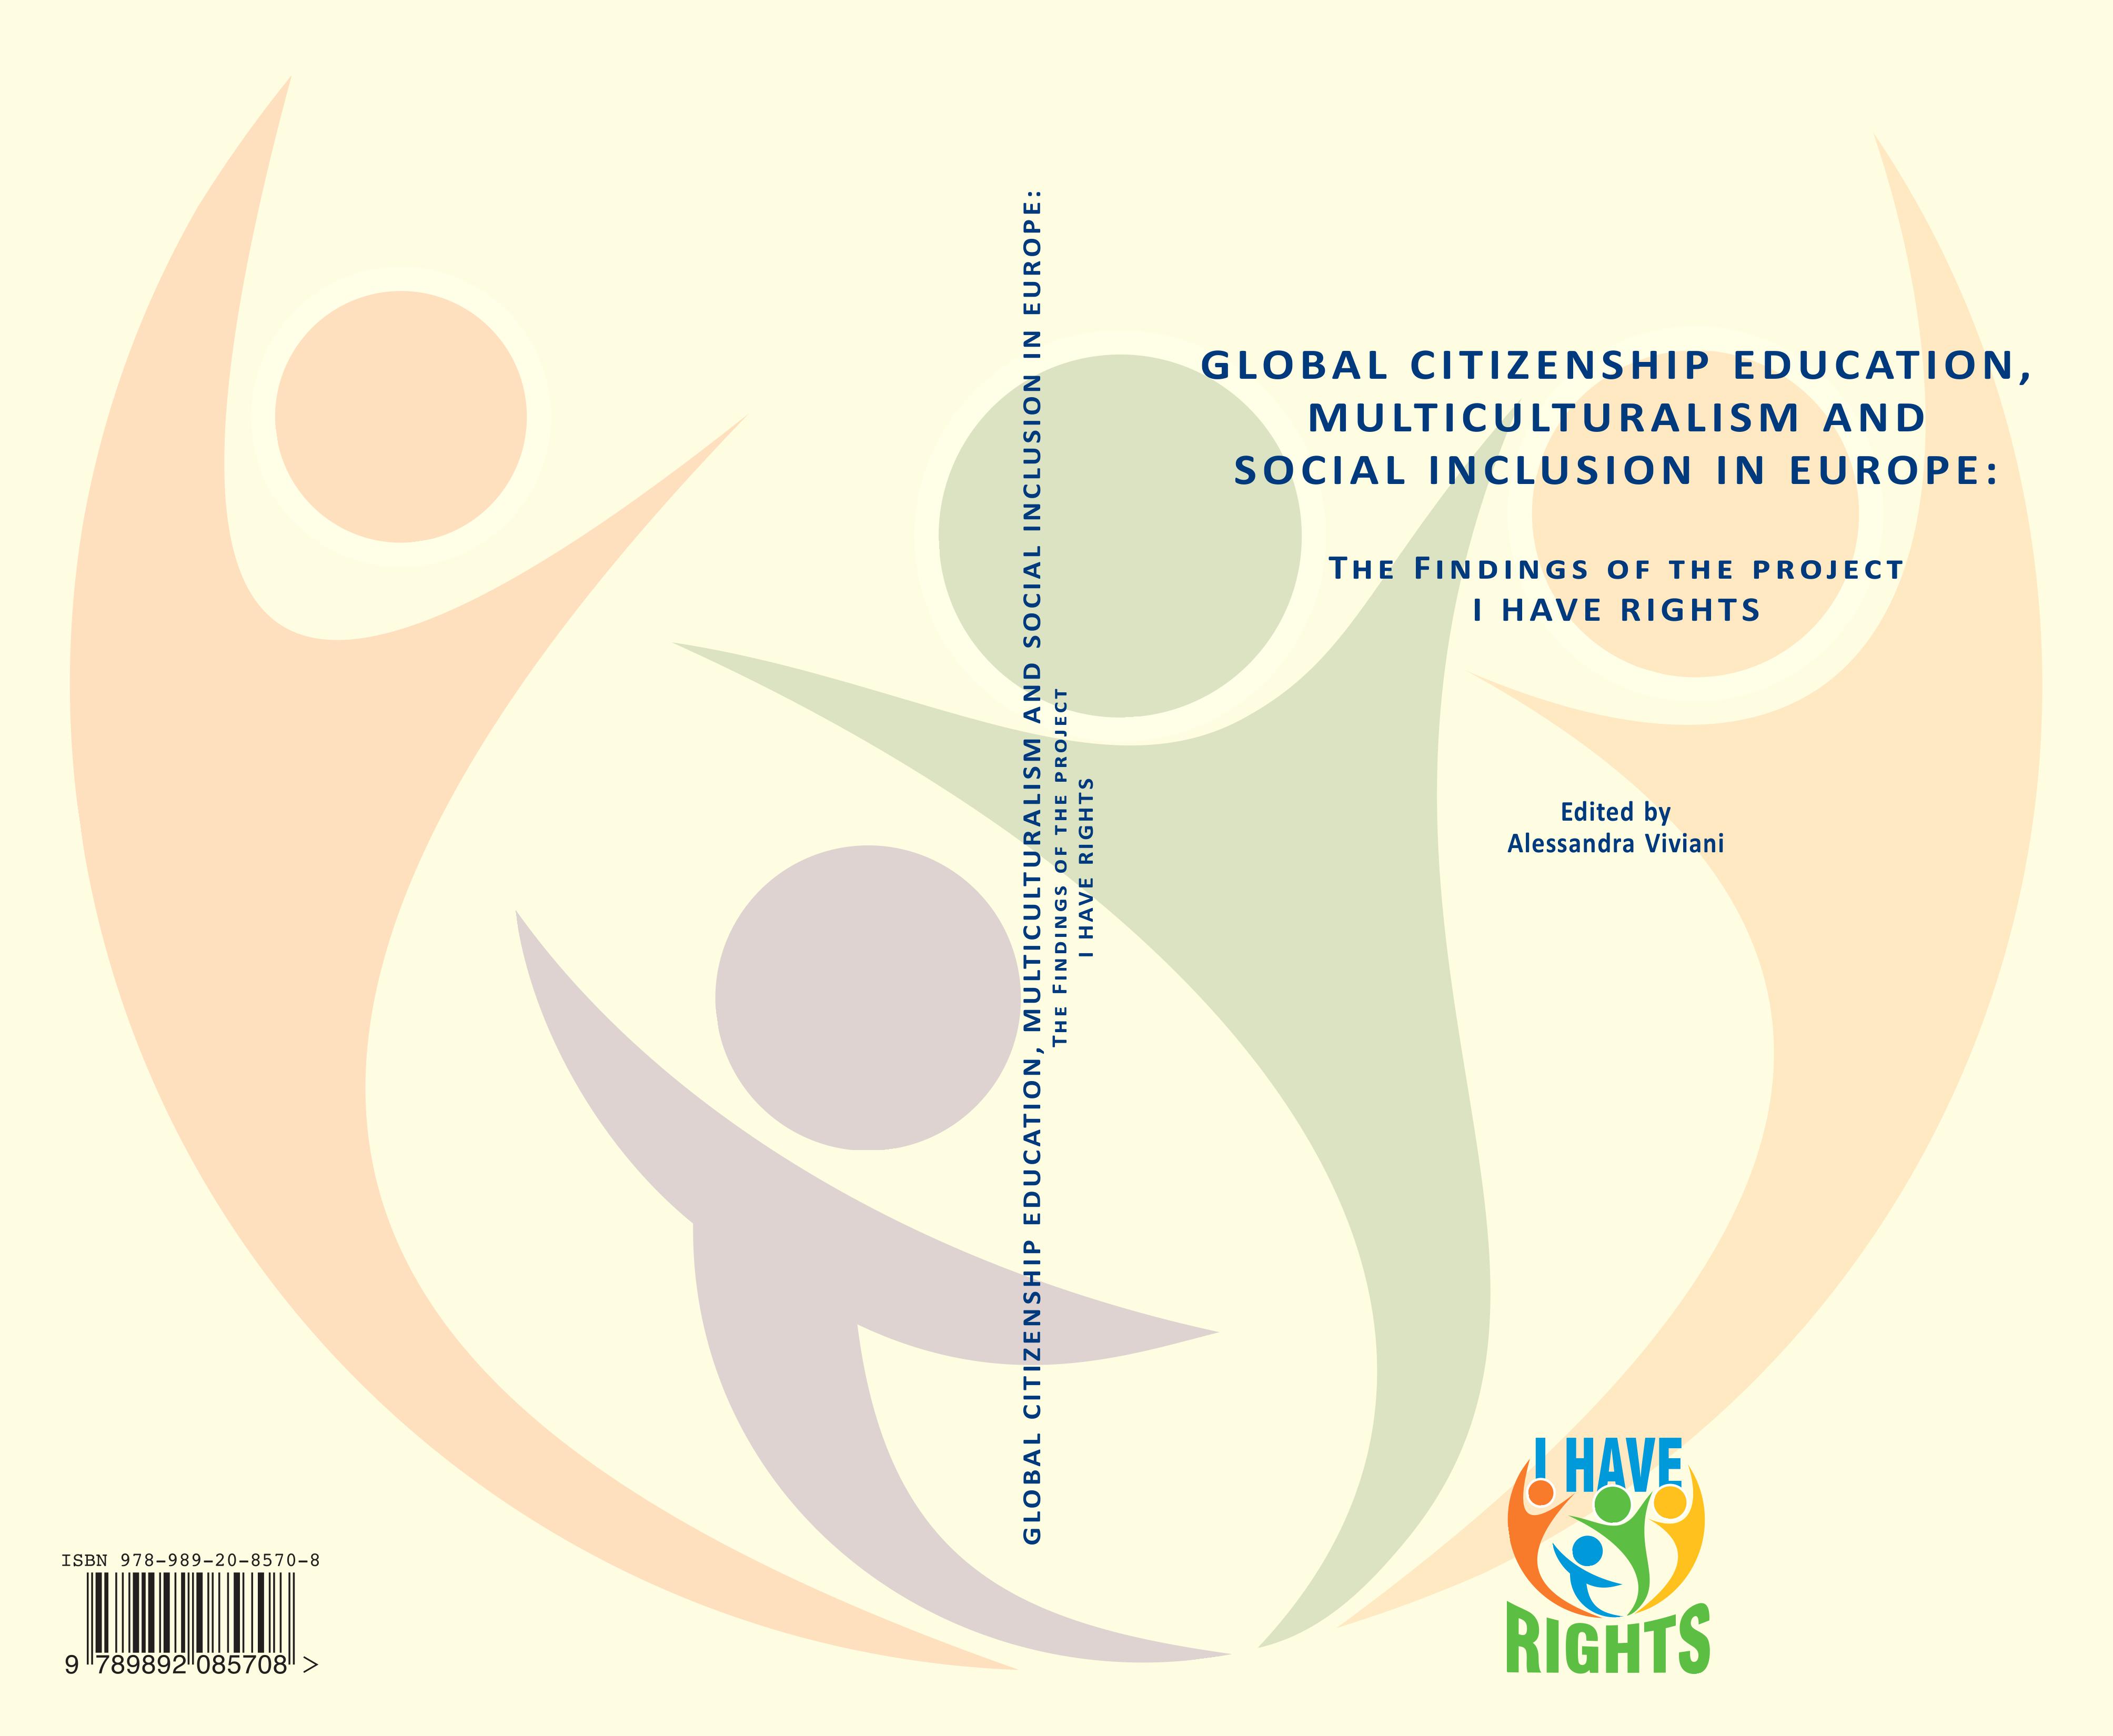 Global Citizenship Education Multiculturalism and Social Inclusion in Europe (2018)